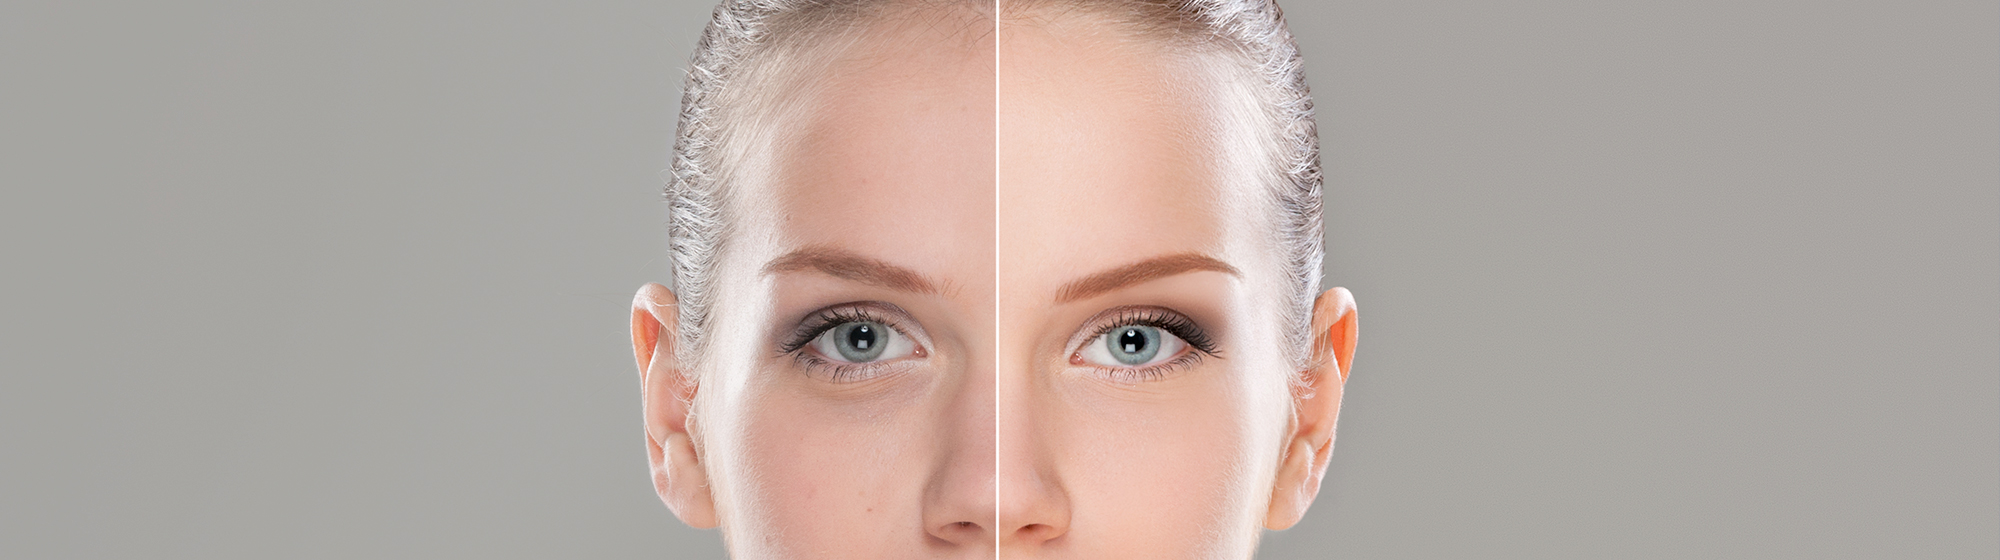 Blepharoplasty Before & After Photos in Tampa Bay, FL